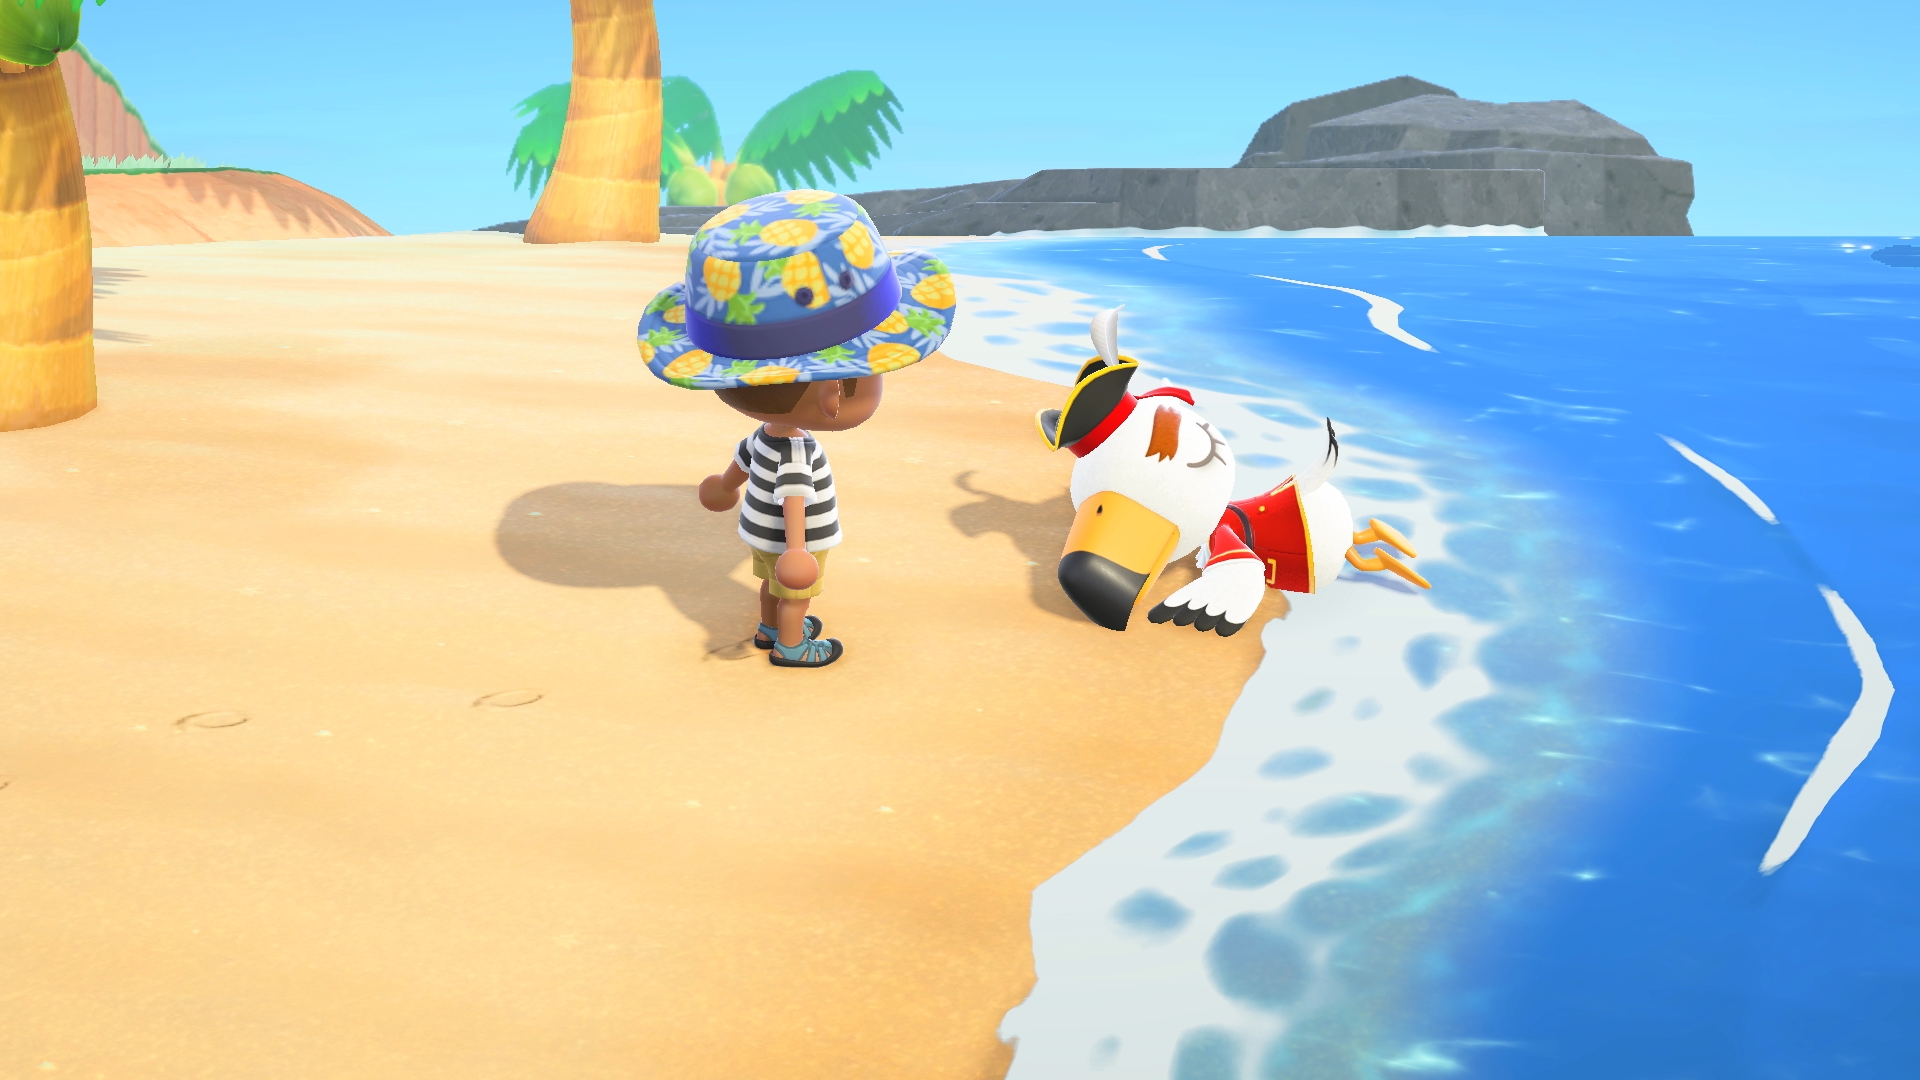 Animal Crossing: New Horizons first free summer update coming July 3